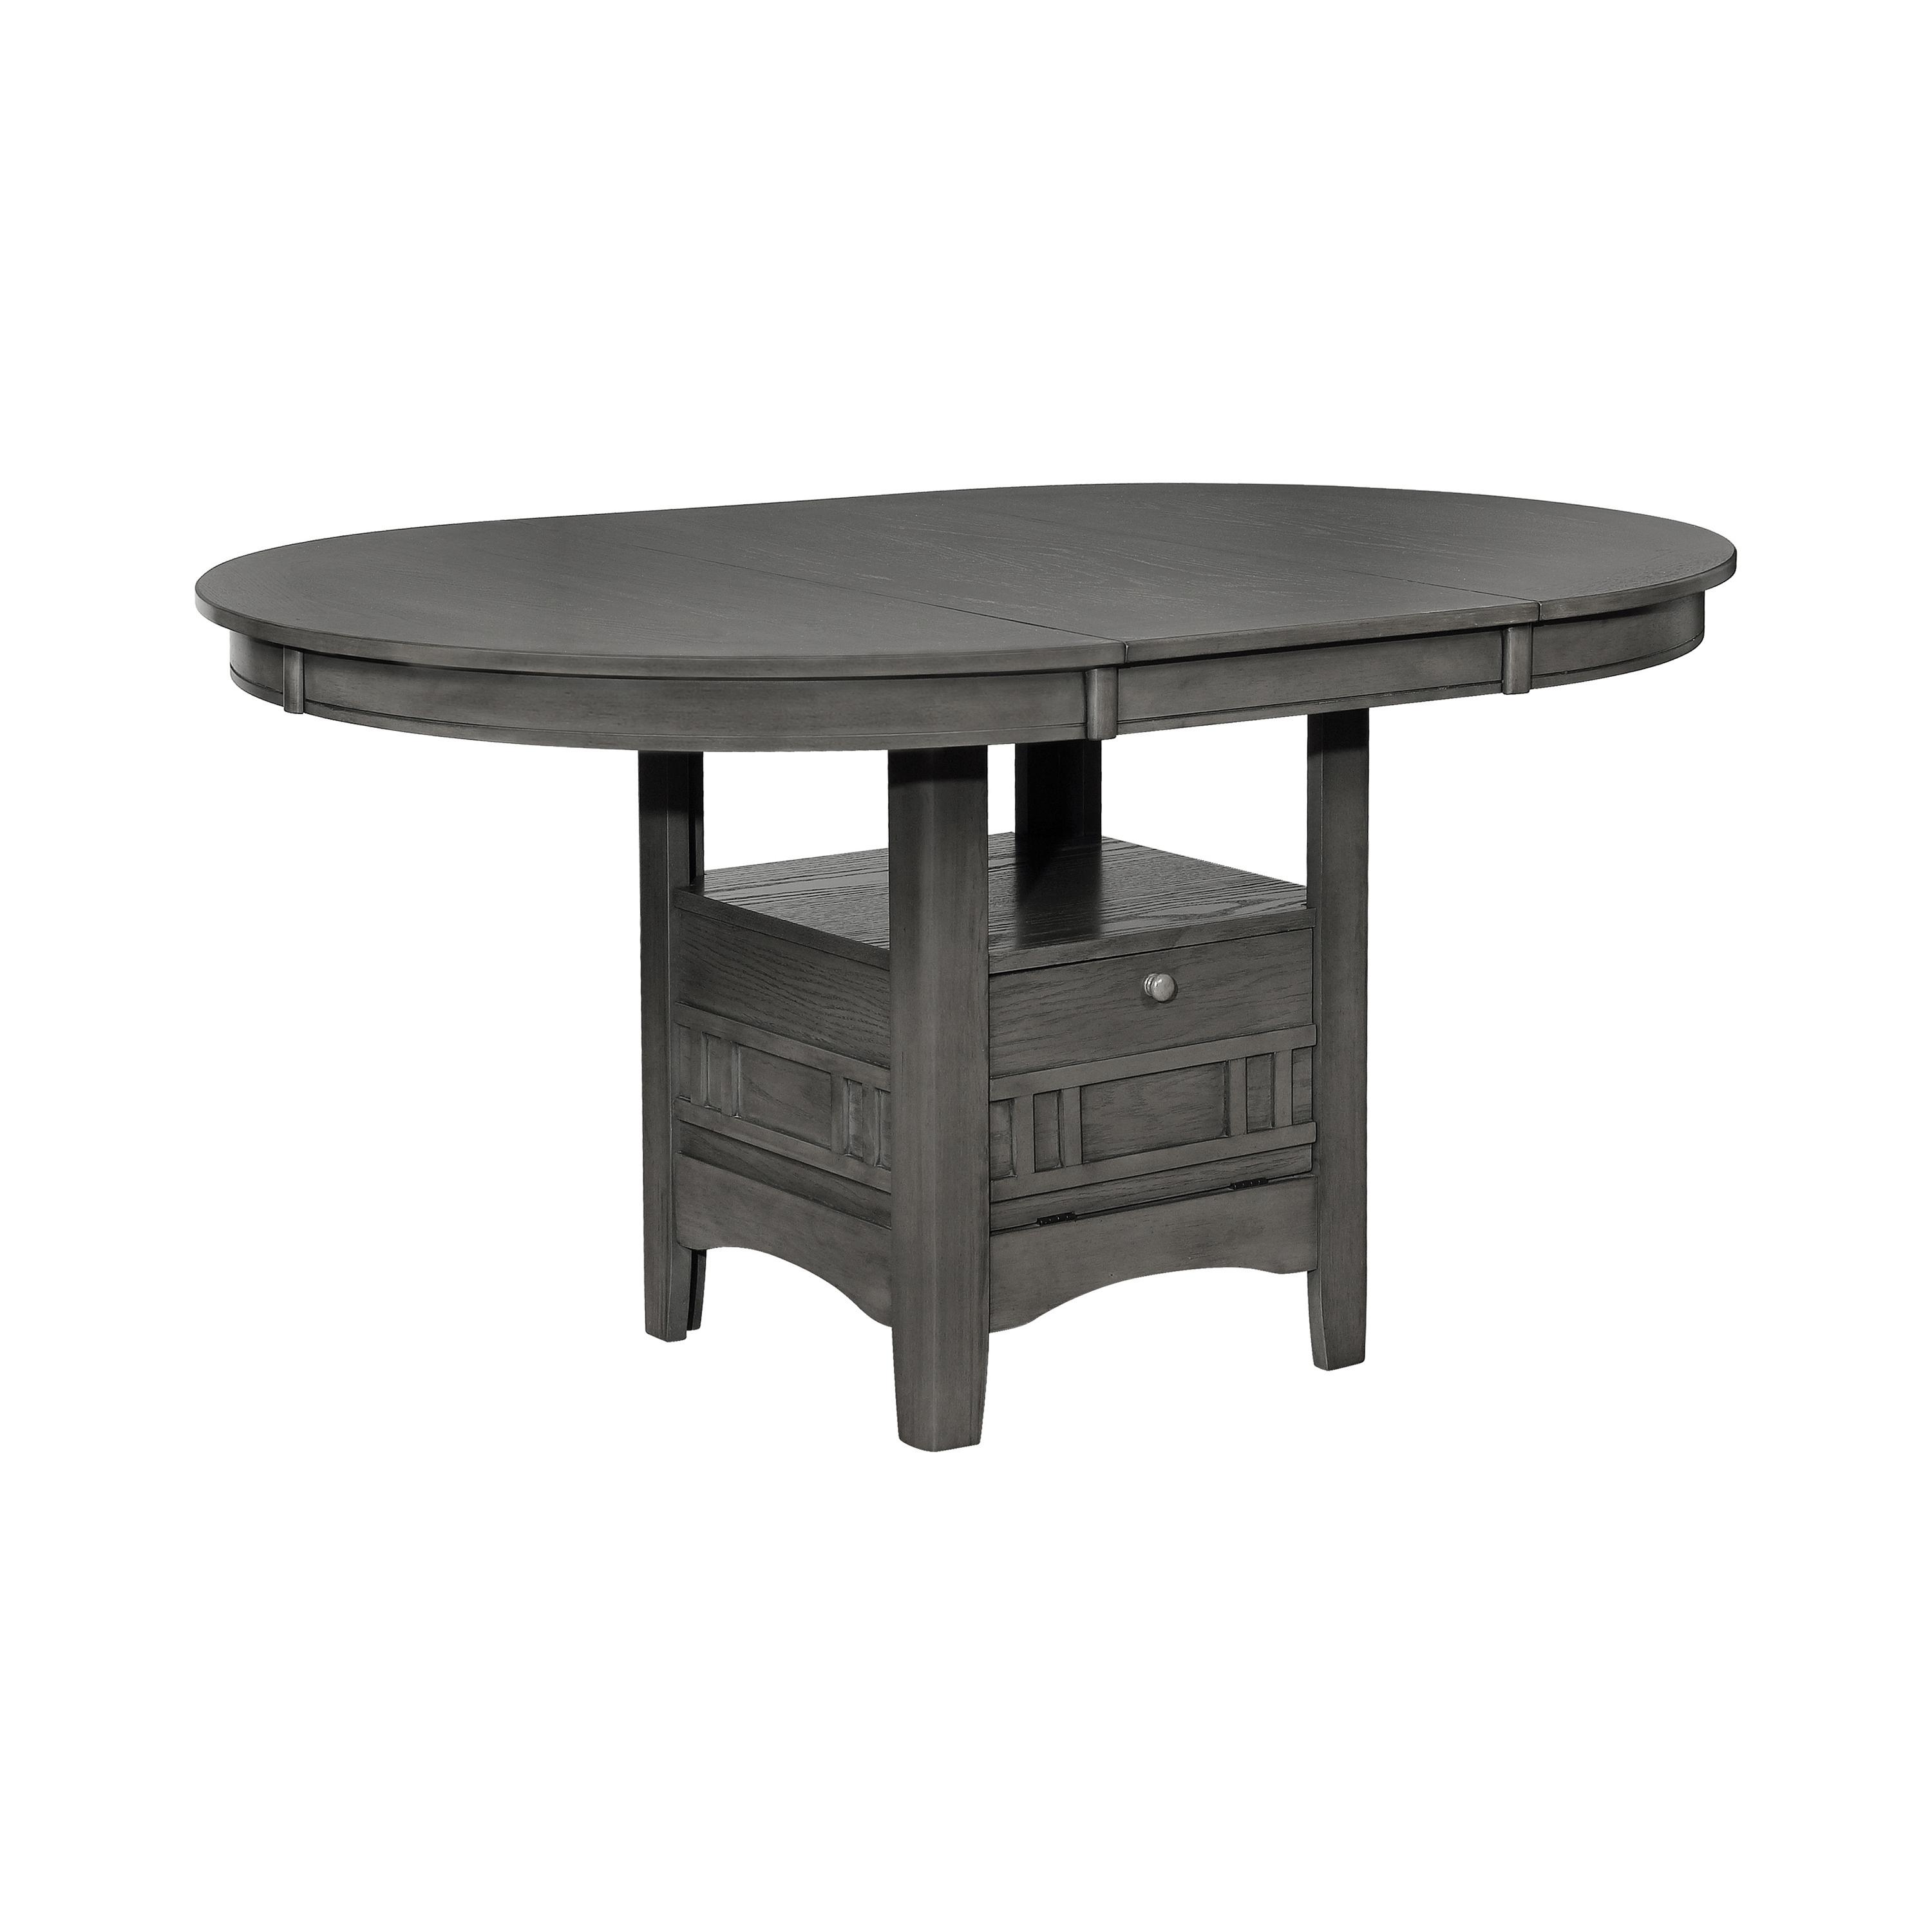 Coaster 108211 Lavon Dining Table